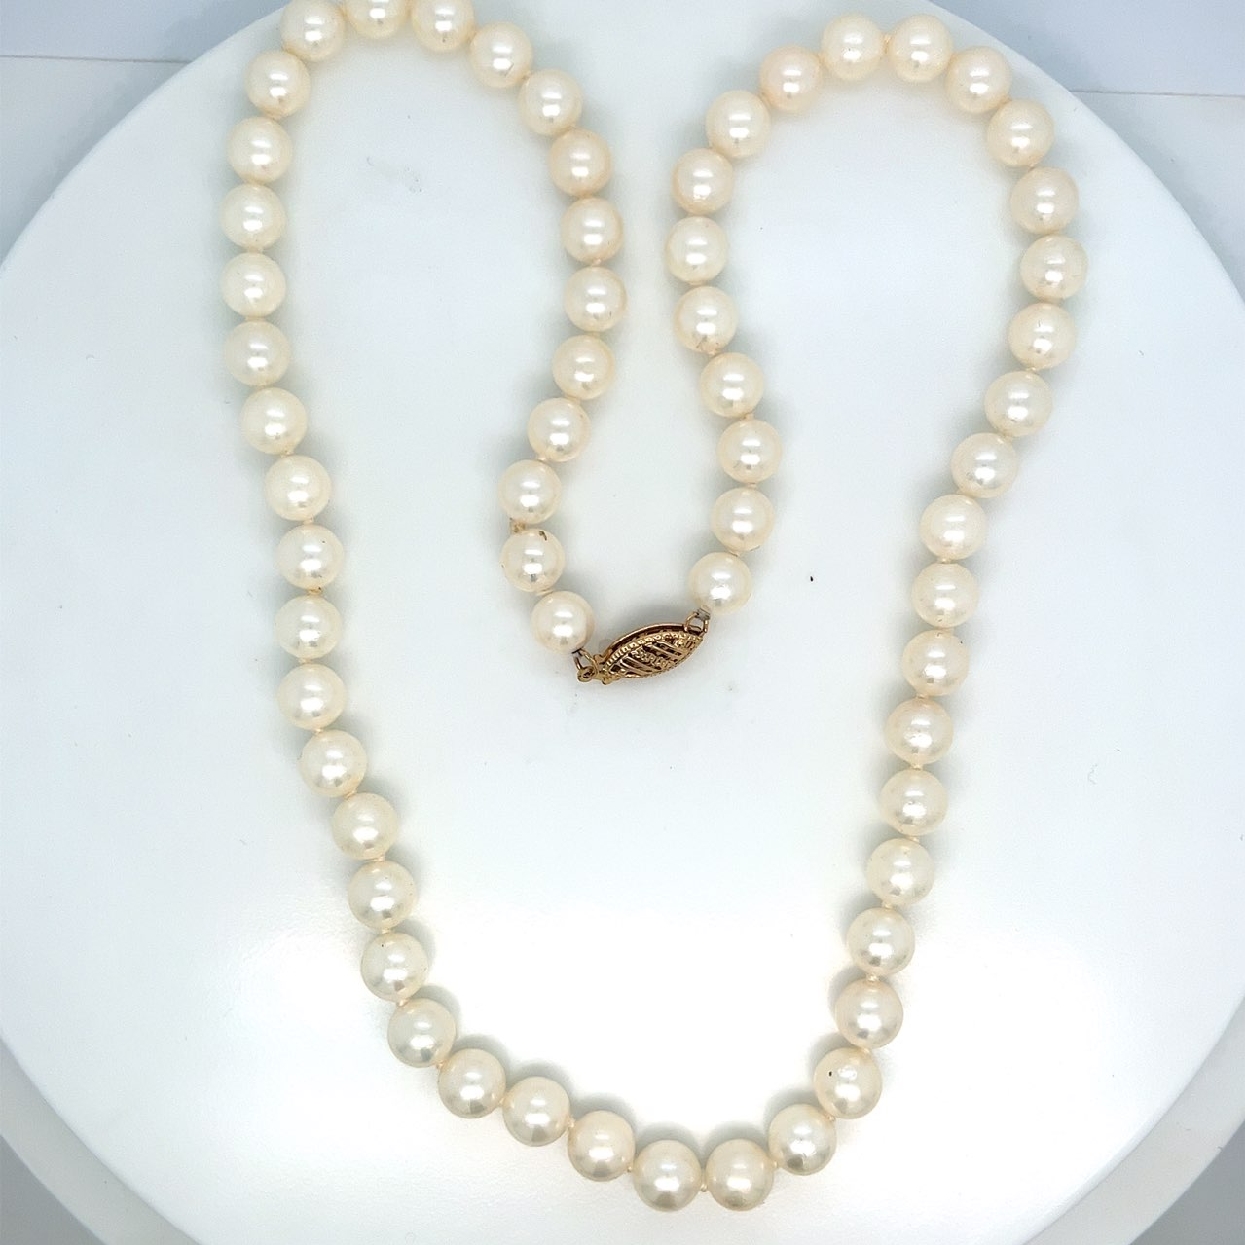 17 Inch Akoya Pearl Necklace with 14K Yellow Gold Clasp 